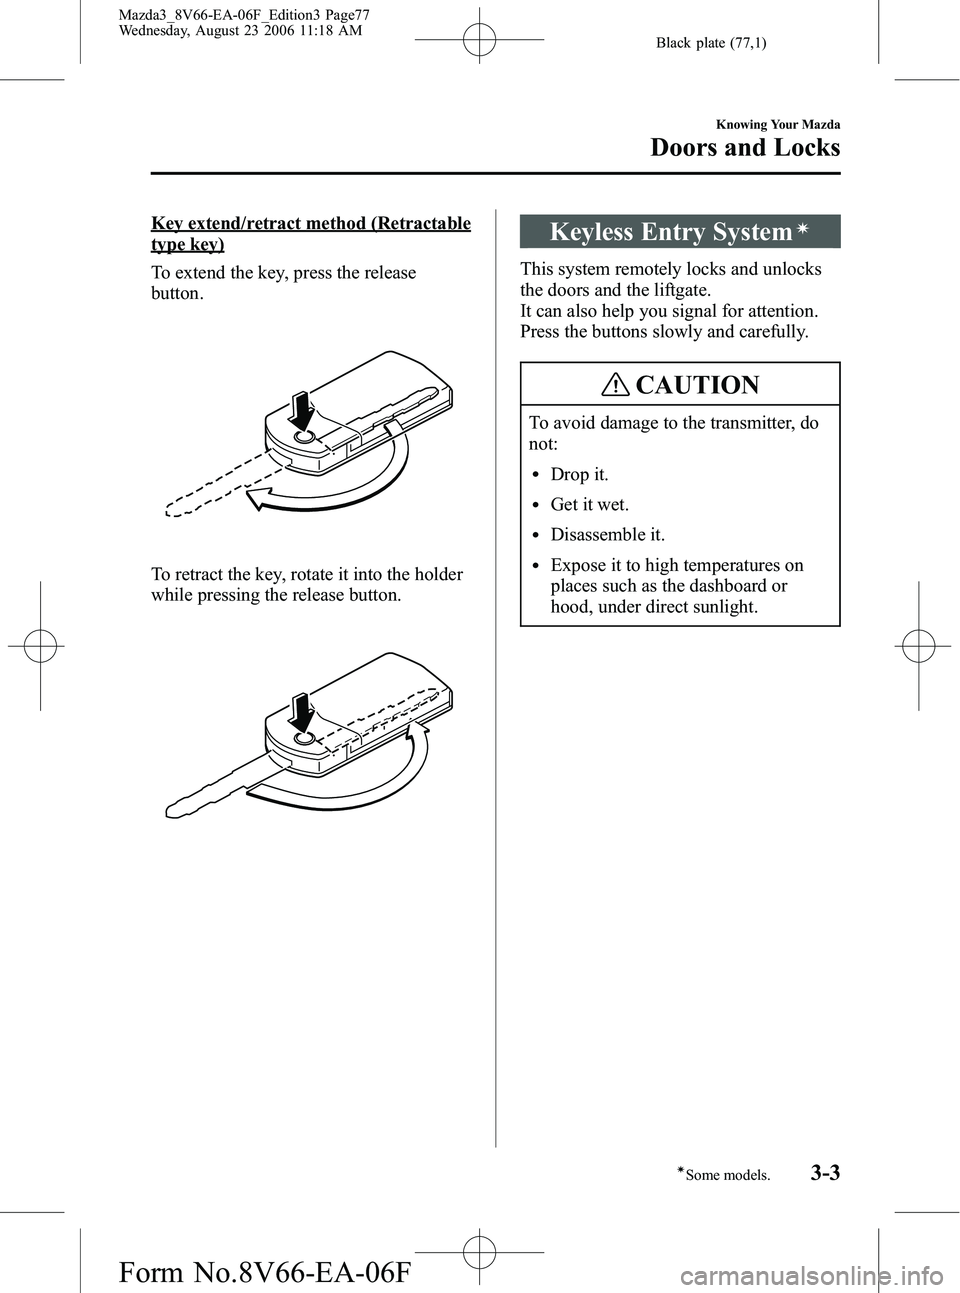 MAZDA MODEL 3 5-DOOR 2007  Owners Manual Black plate (77,1)
Key extend/retract method (Retractable
type key)
To extend the key, press the release
button.
To retract the key, rotate it into the holder
while pressing the release button.
Keyles